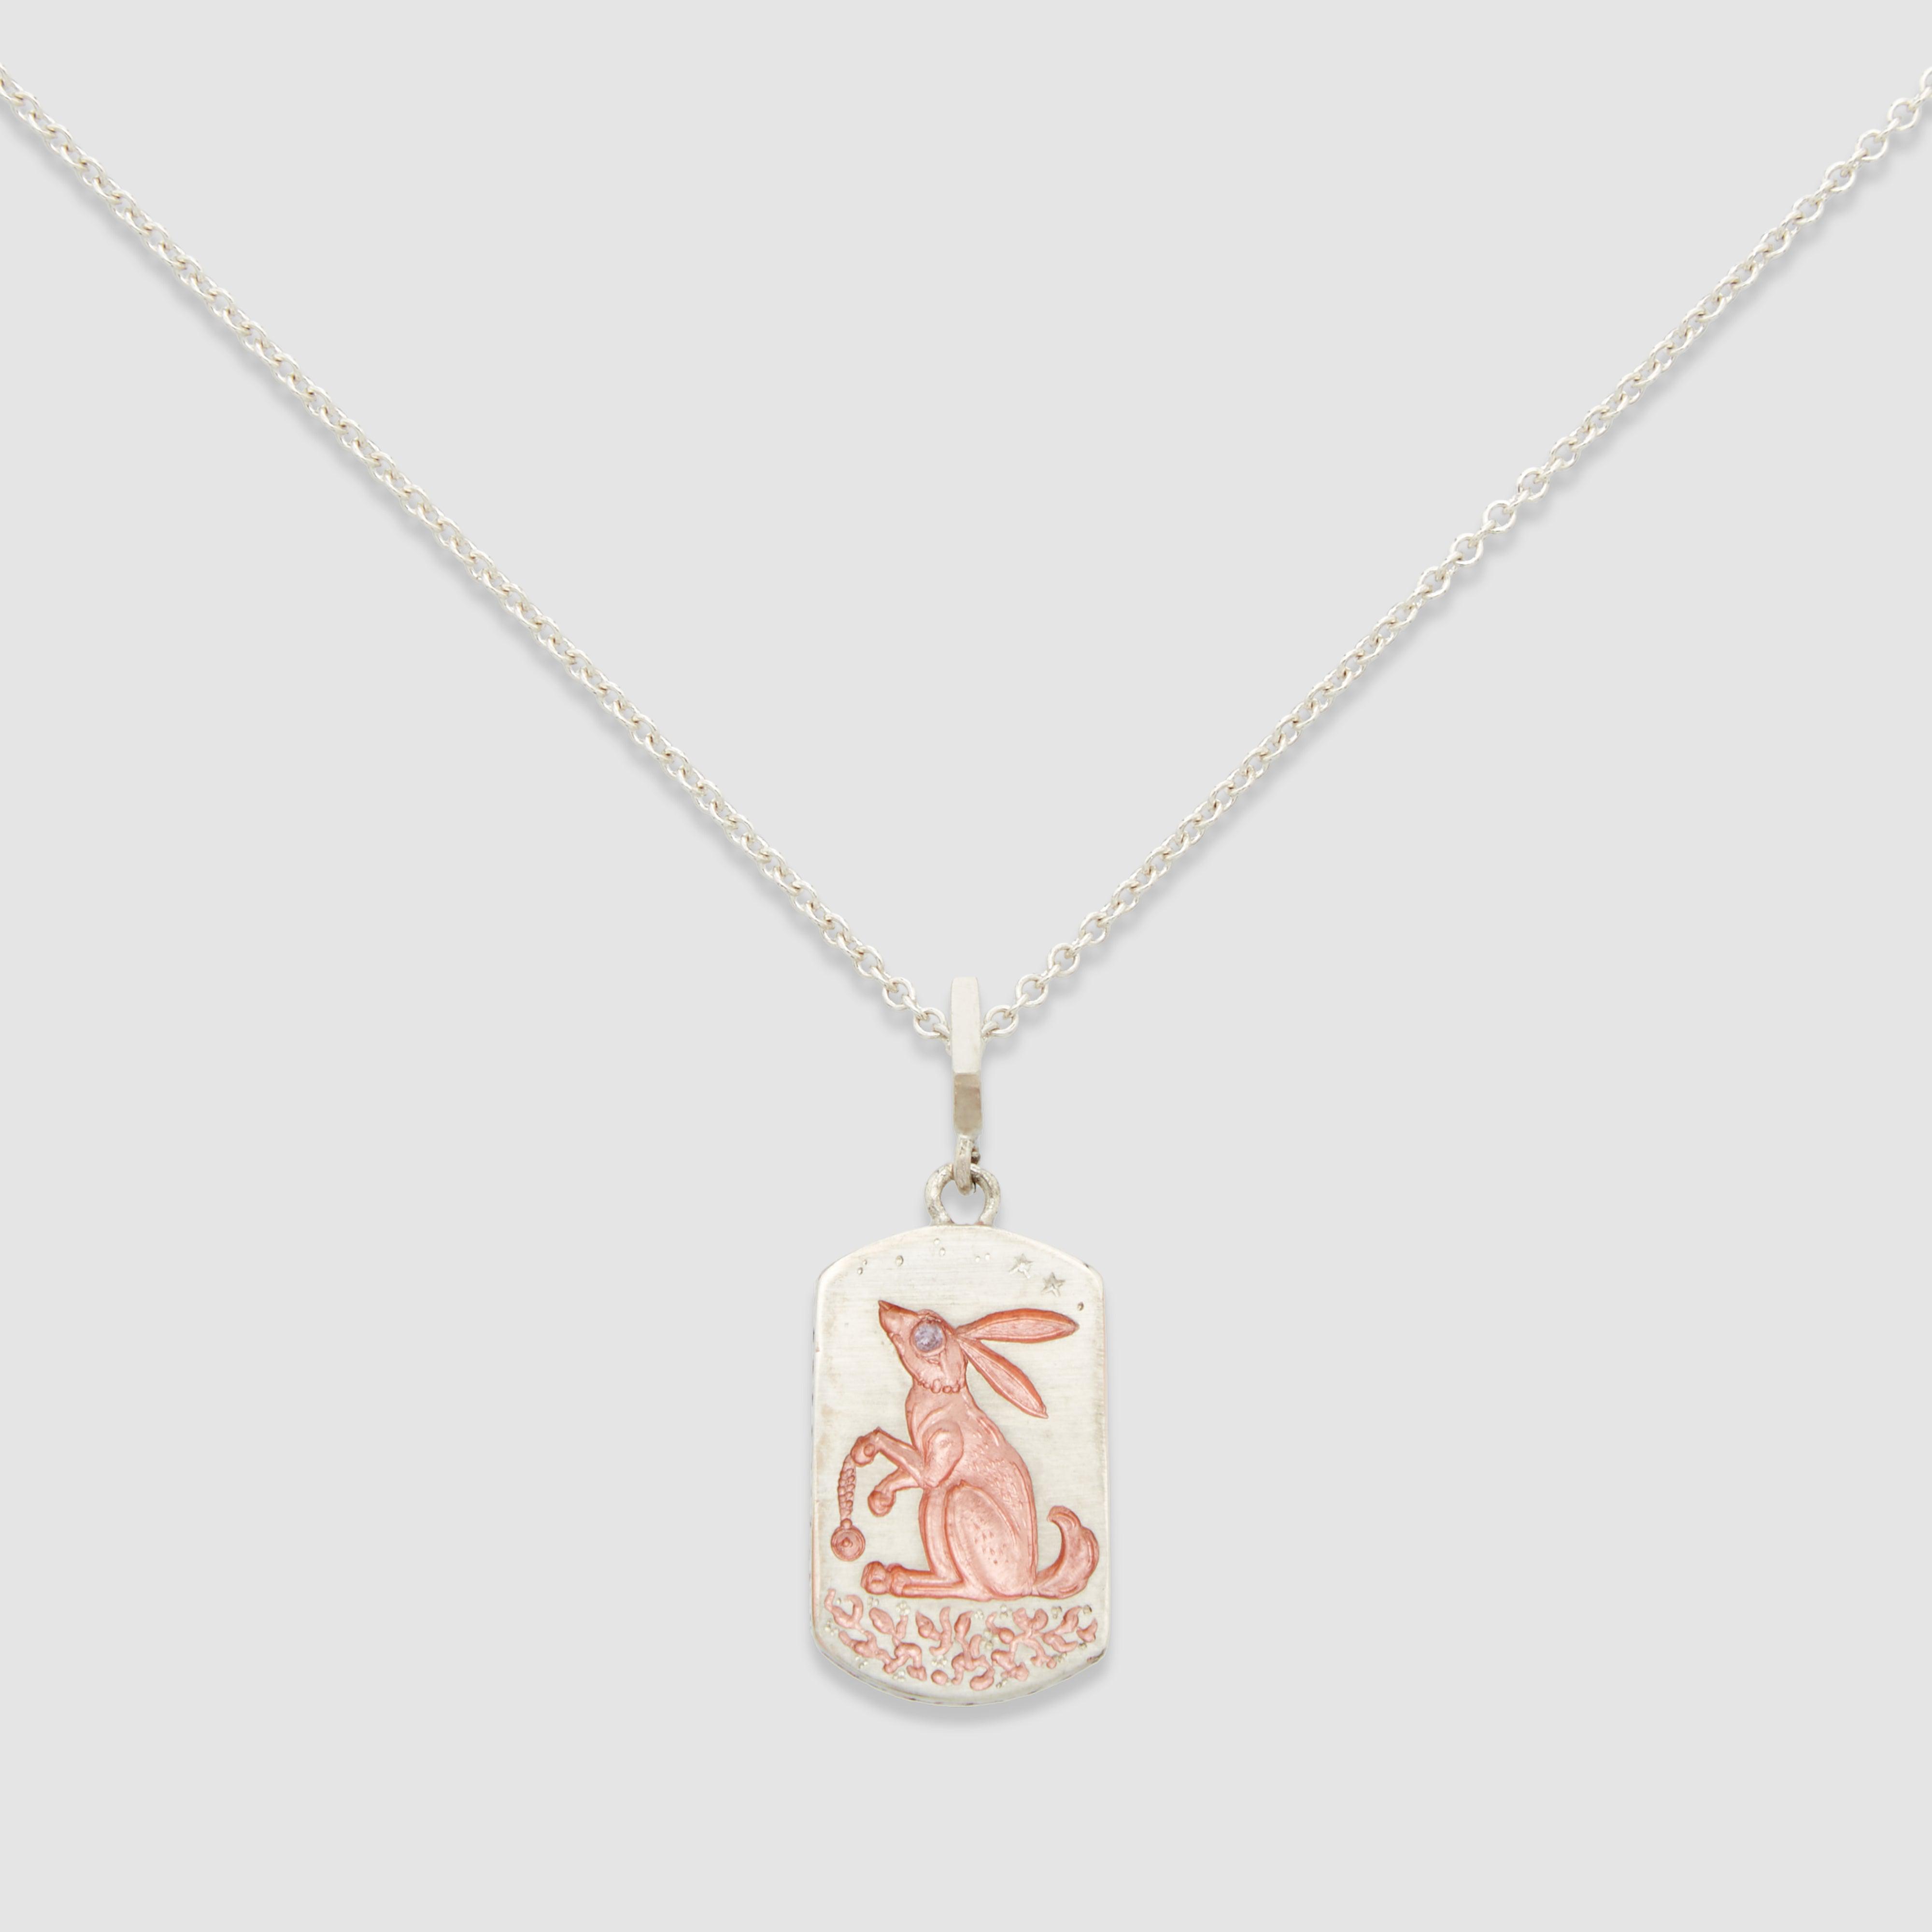 Castro Silver and Pink Ceramic Rabbit And Carrot Pendant by CASTRO